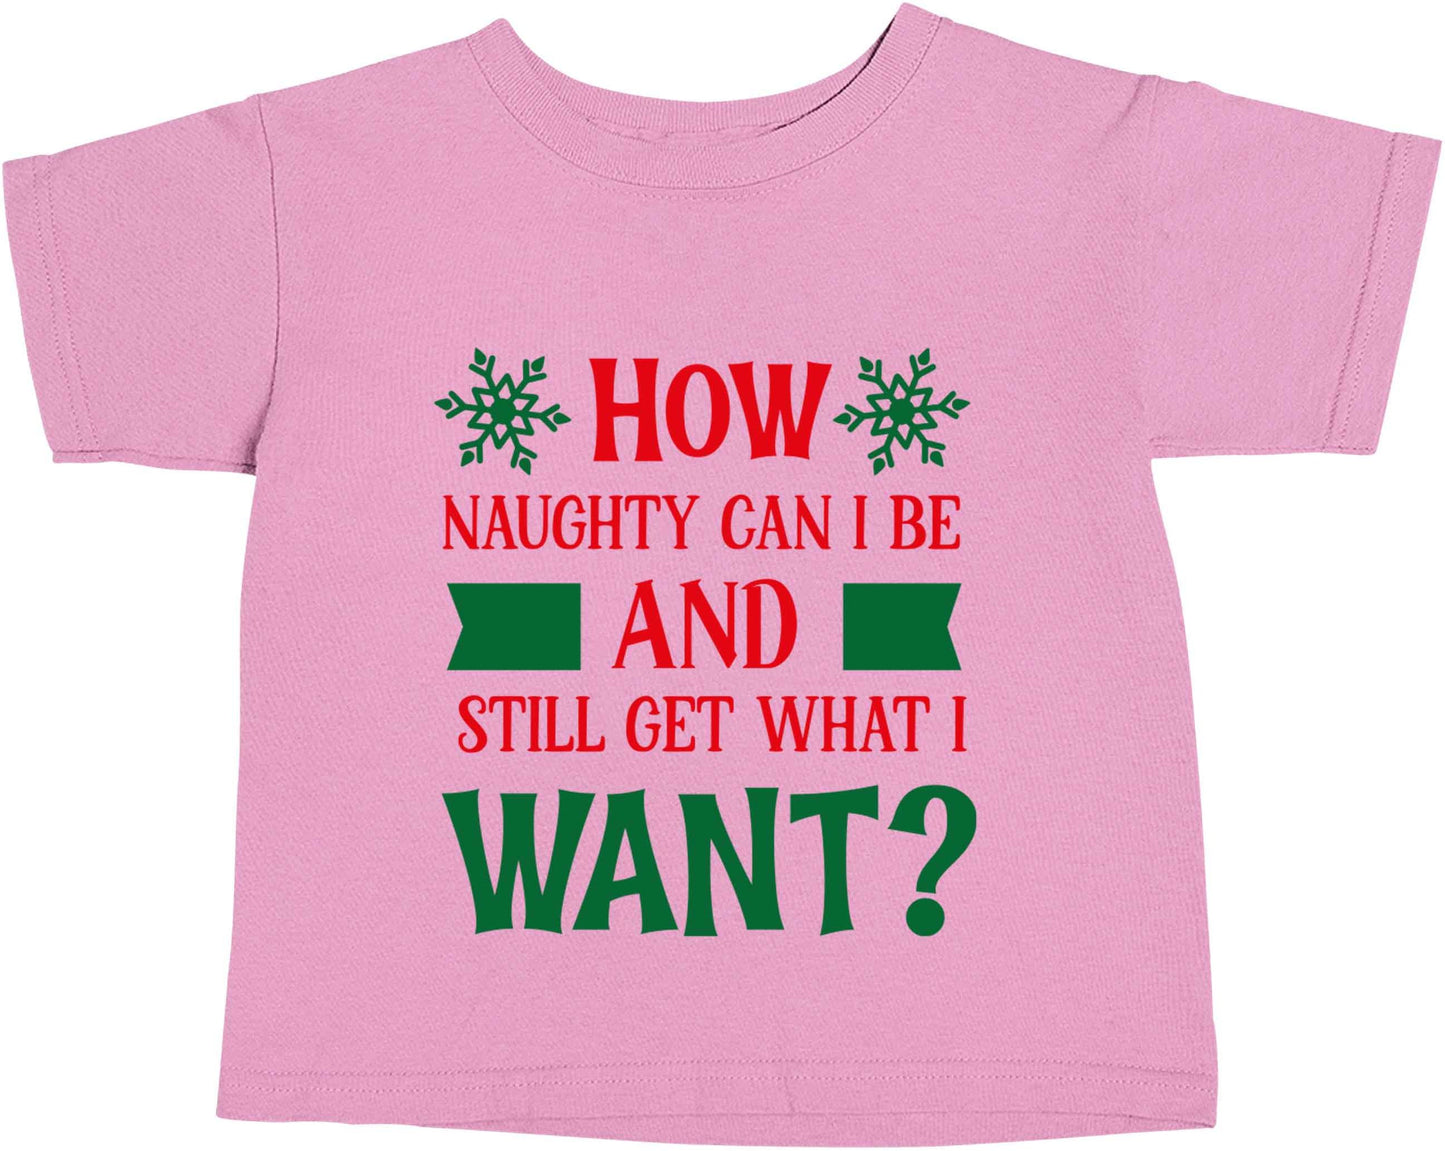 How naughty can I be and still get what I want? light pink baby toddler Tshirt 2 Years